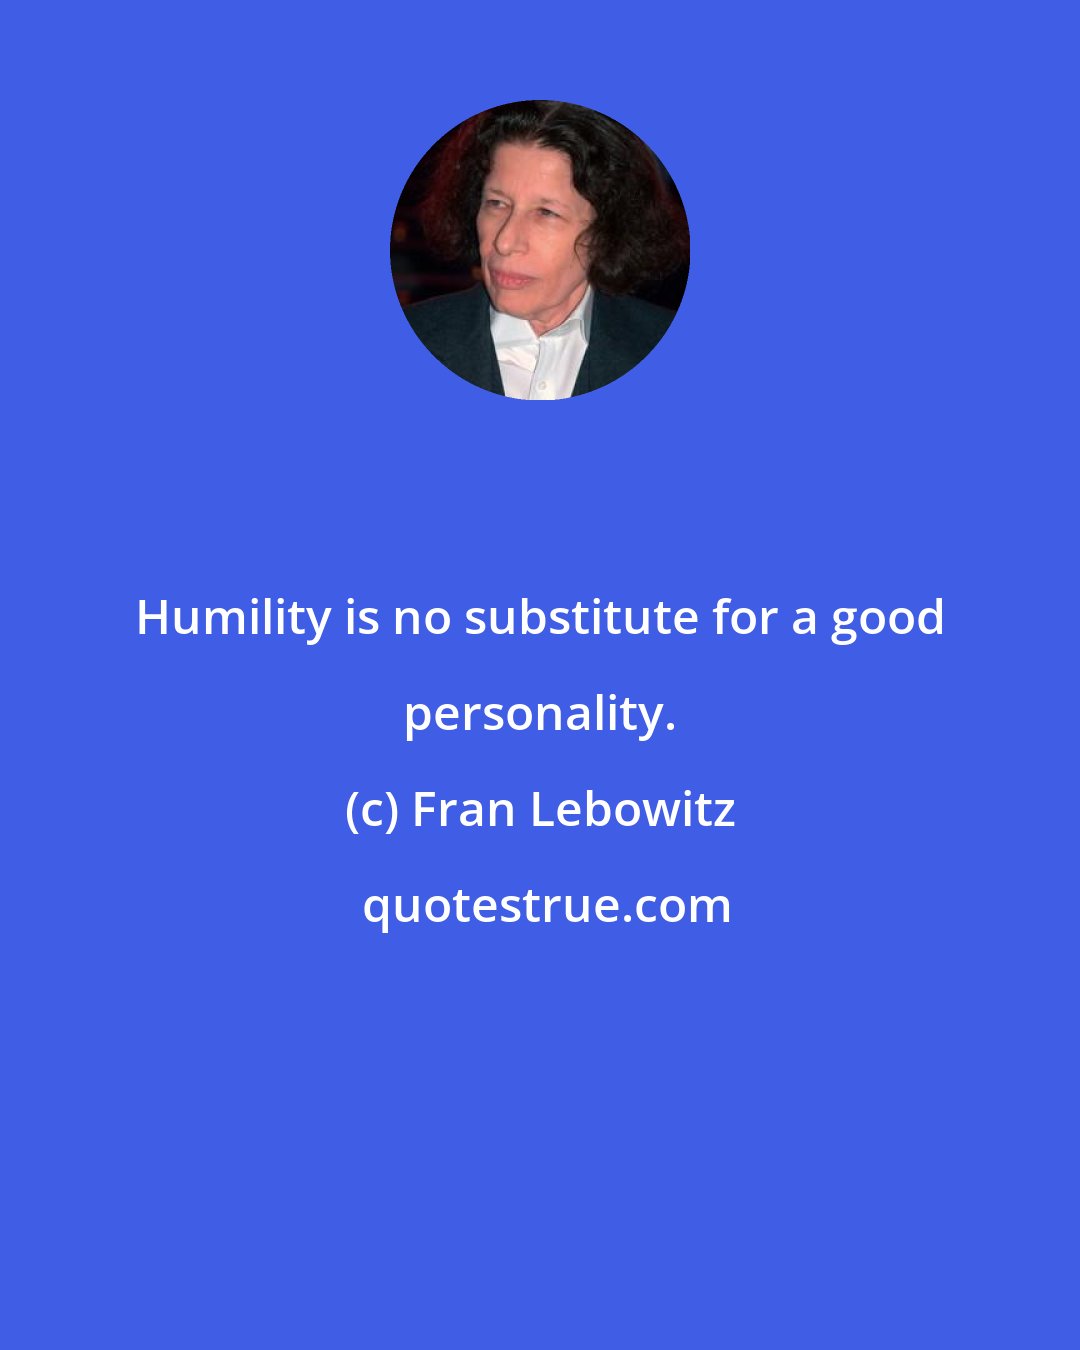 Fran Lebowitz: Humility is no substitute for a good personality.